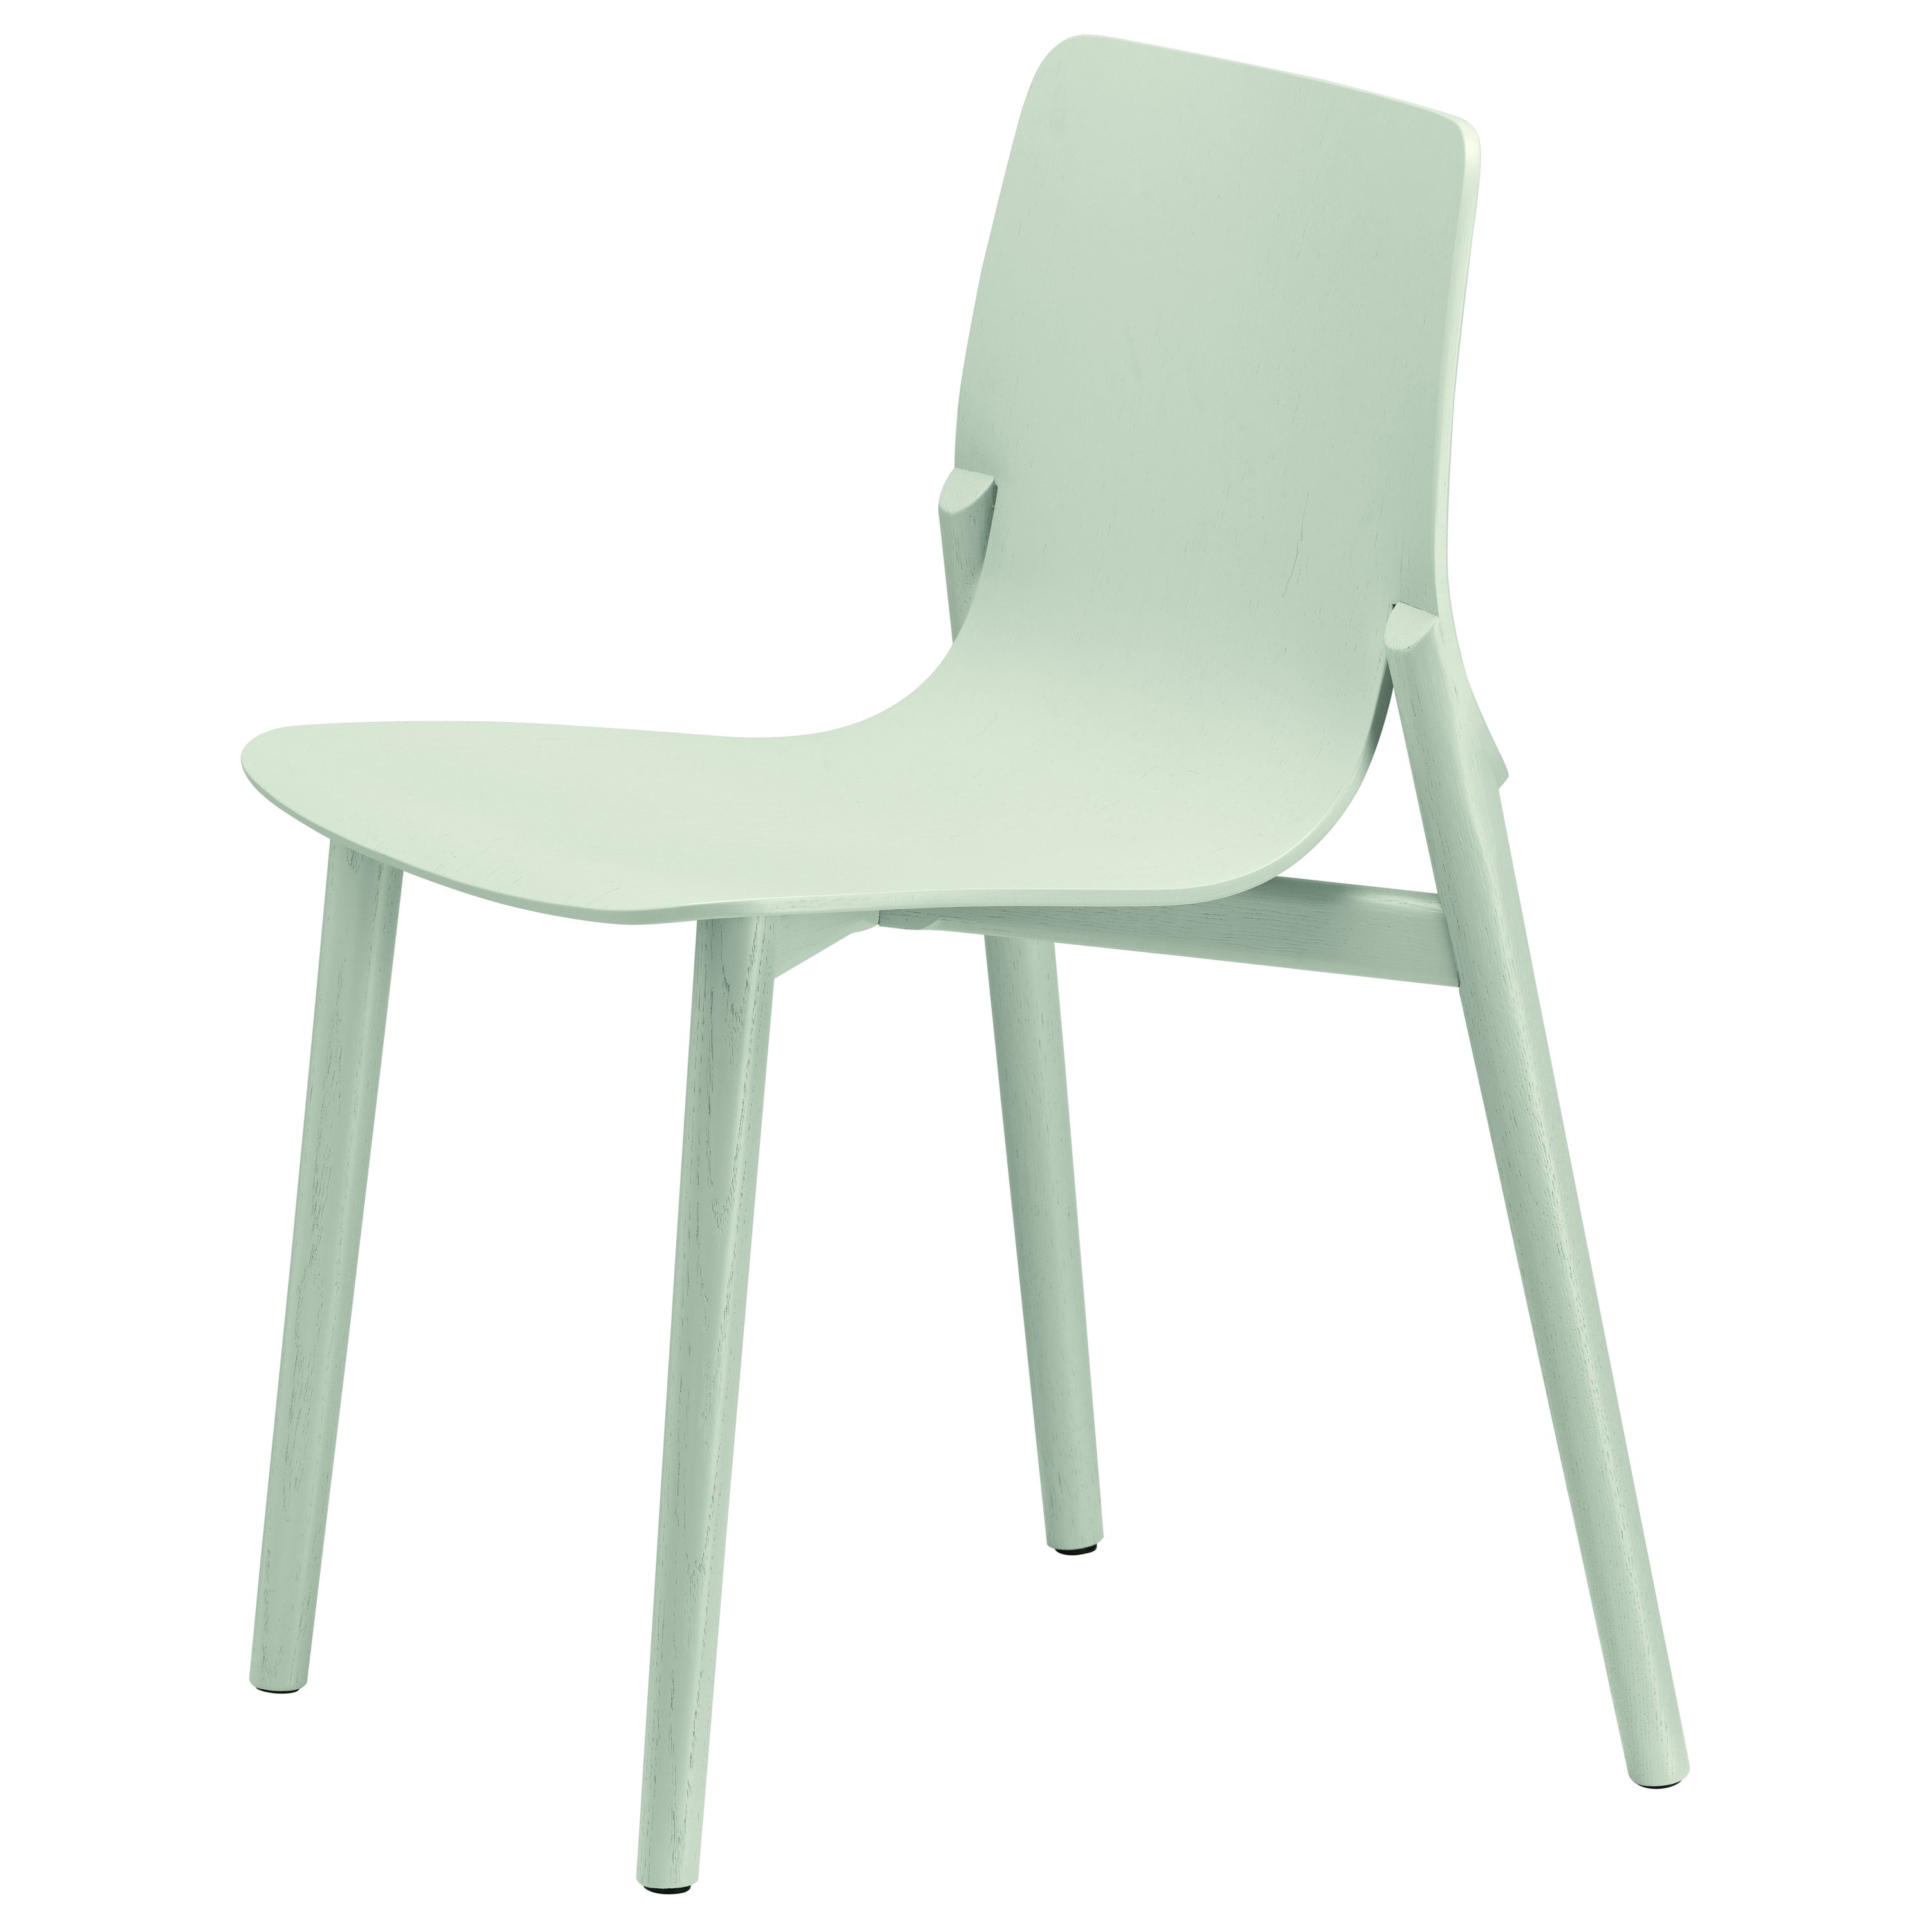 Alias 047 Kayak Chair in White Oak Stained Seat and Frame by Patrick Norguet For Sale